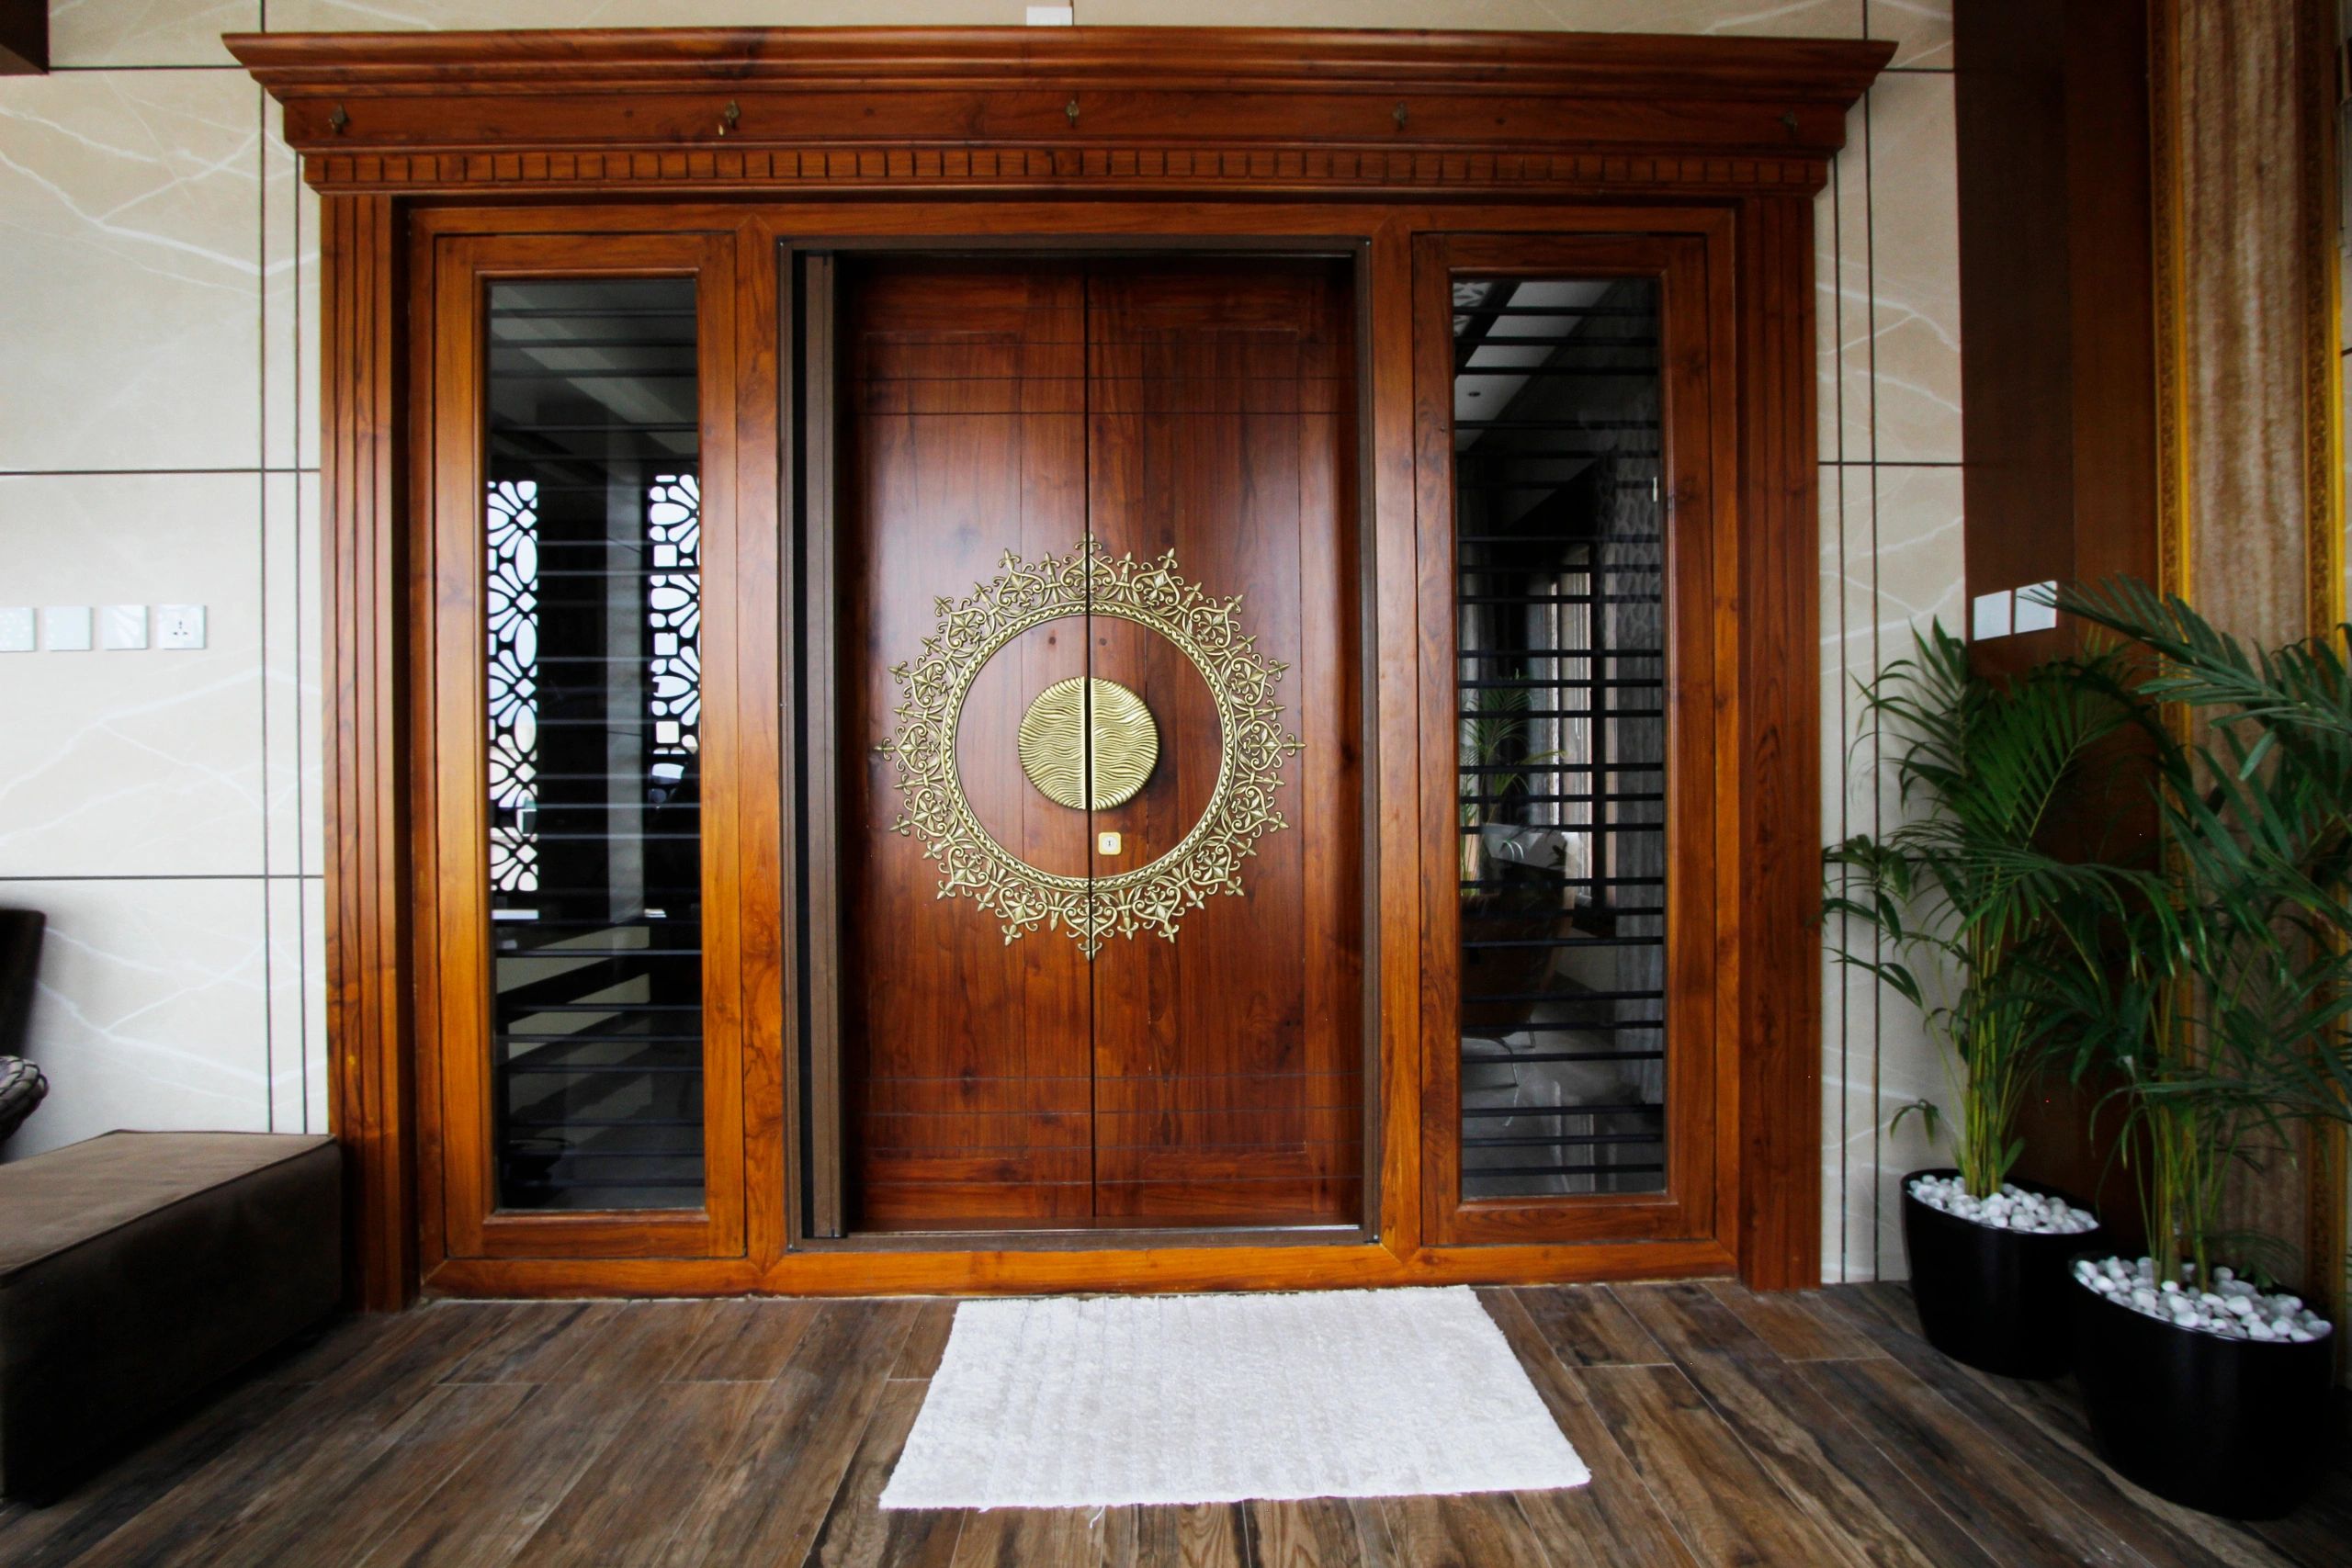 Main entry door with brass embellishments and handles